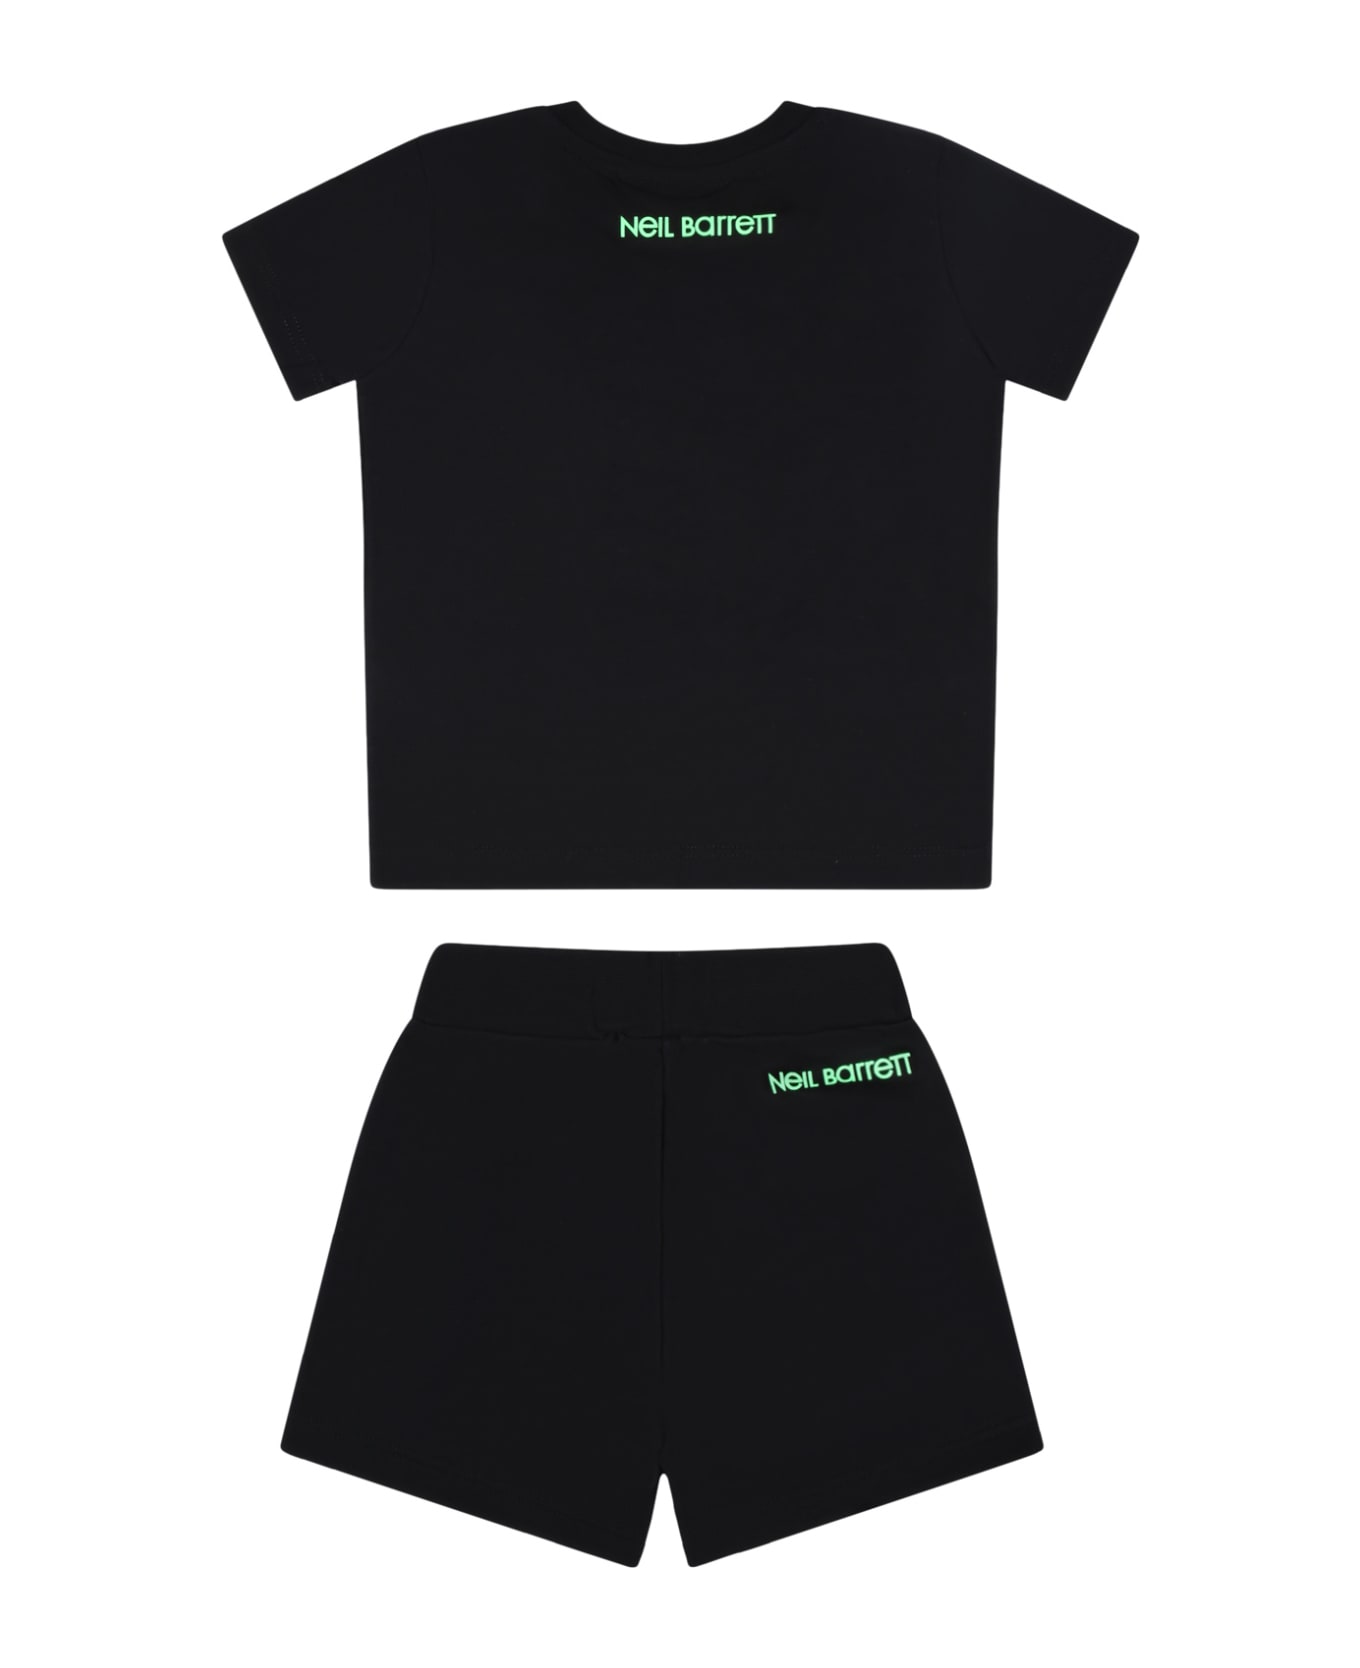 Neil Barrett Black Tracksuit For Baby Boy With Iconic Lightning Bolts - Black